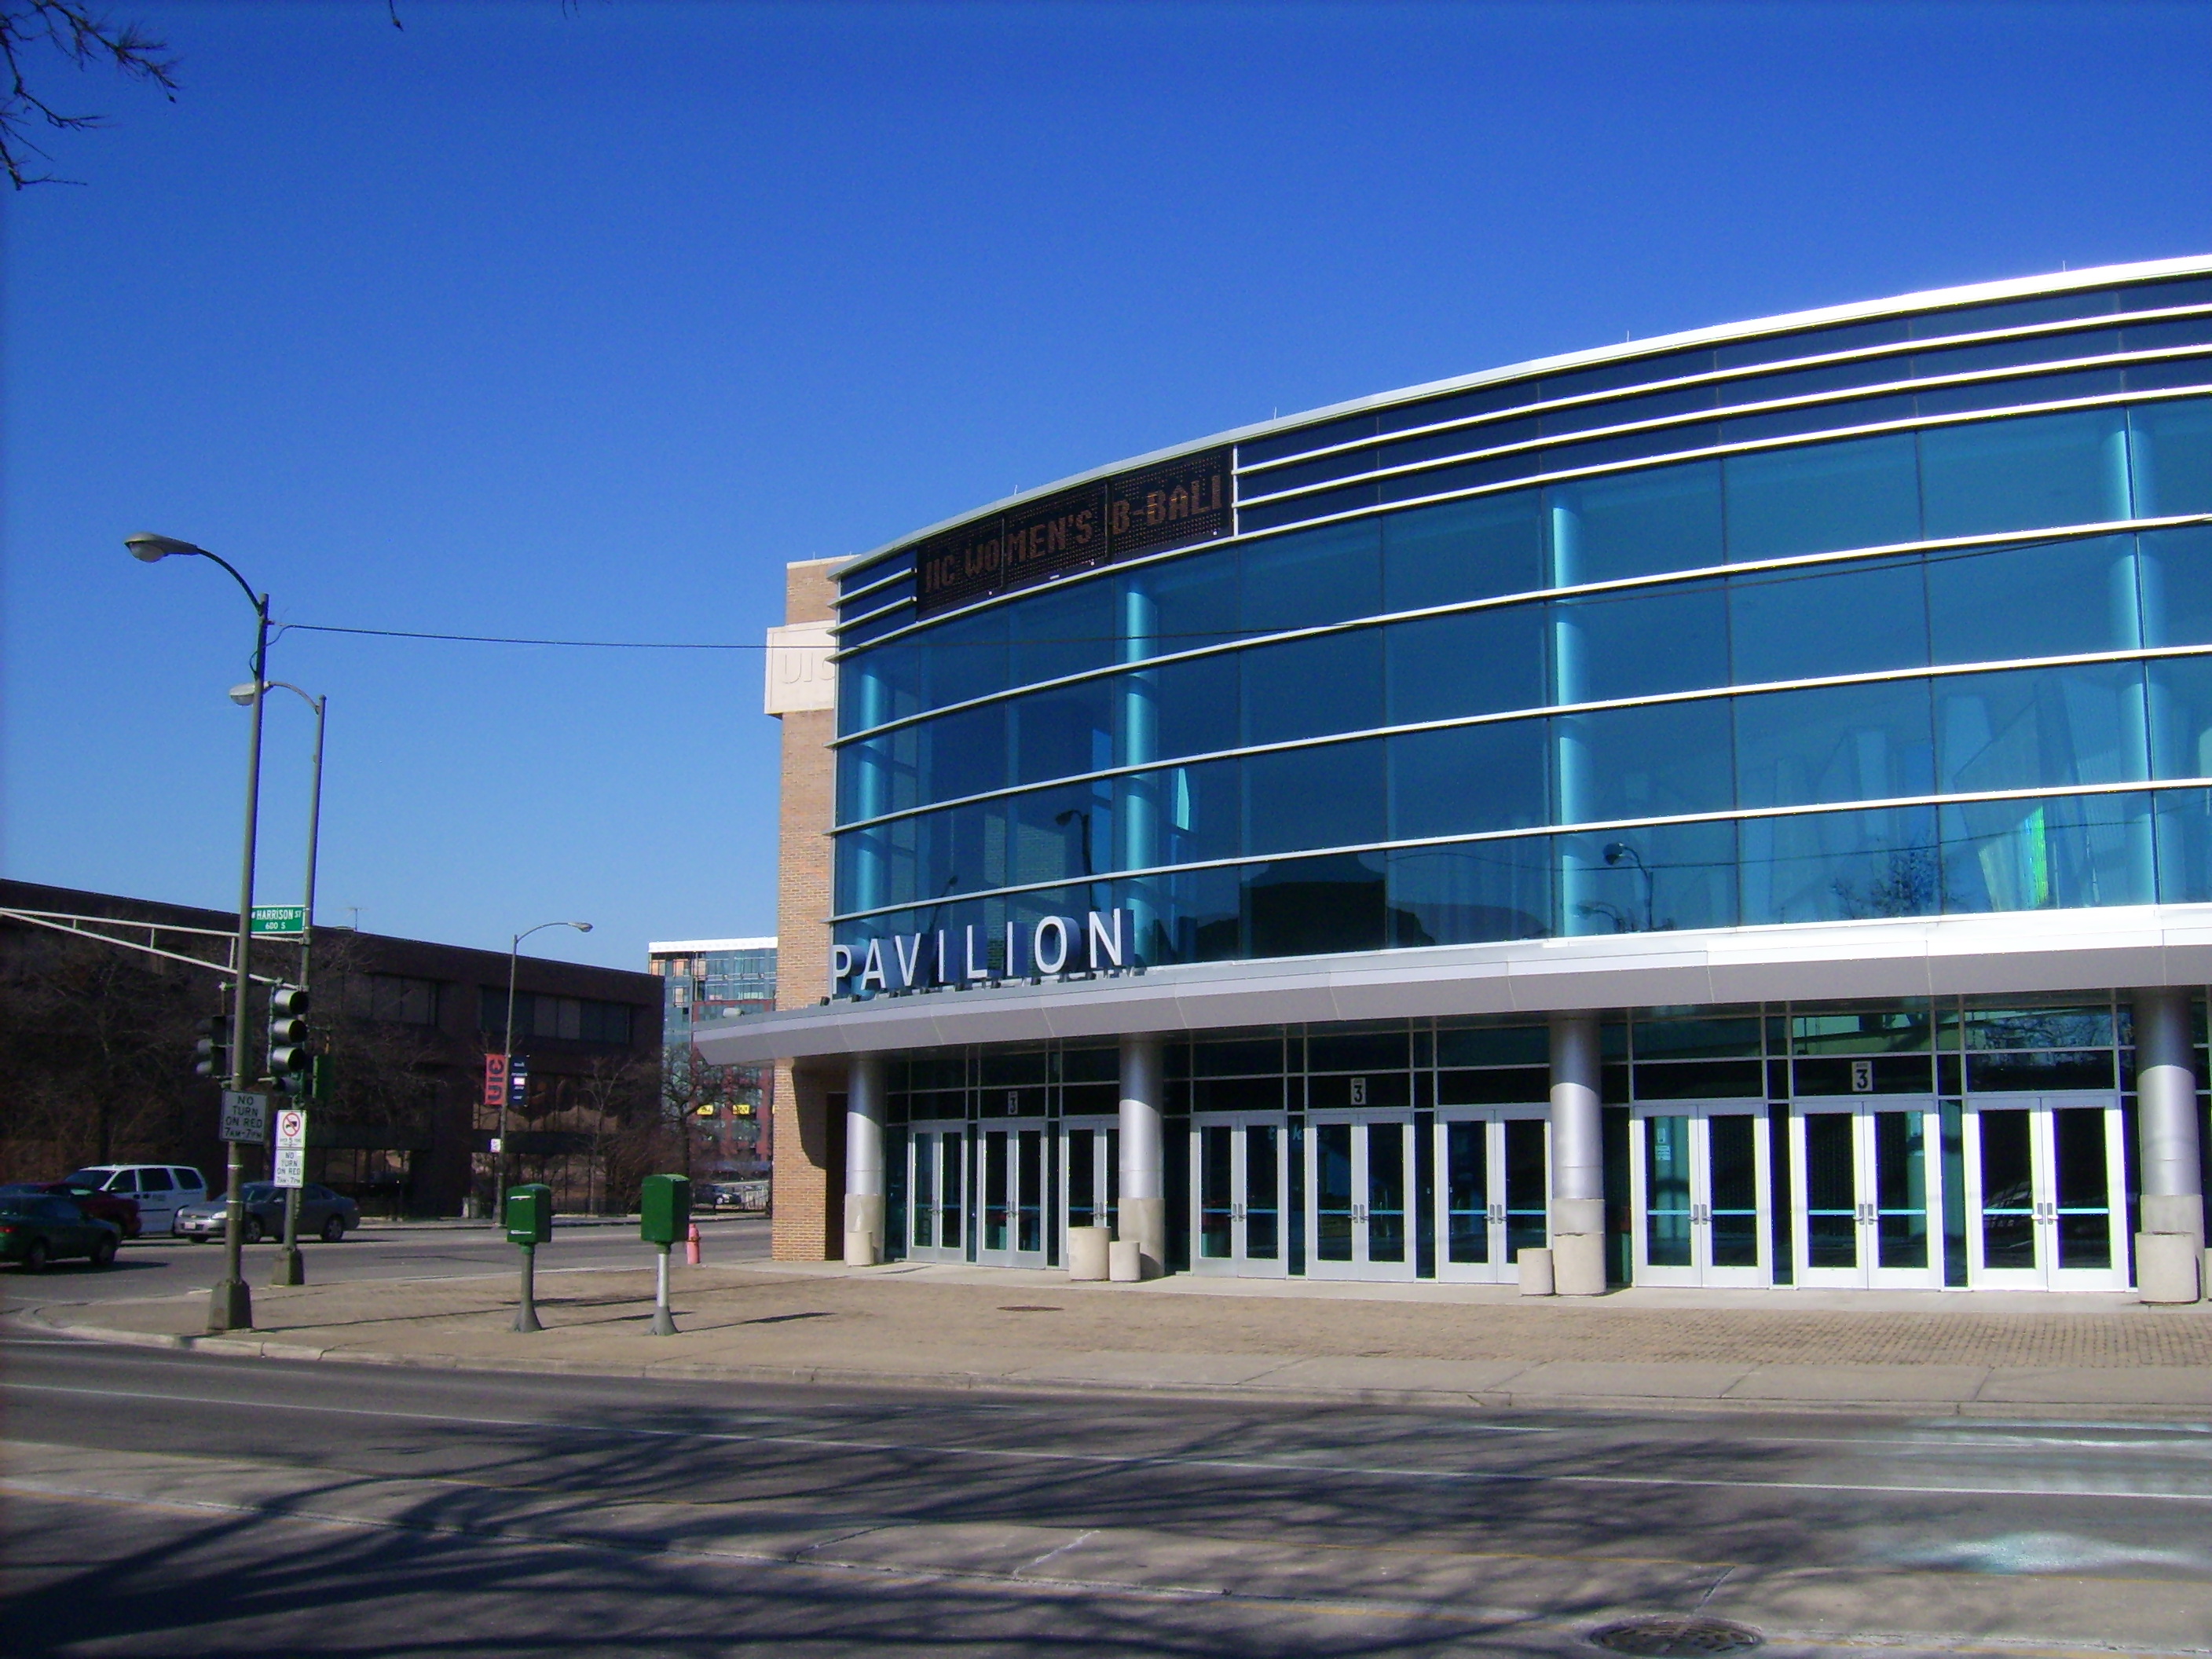 Credit Union 1 Arena at UIC - Chicago | Tickets, Schedule, Seating Chart, Directions